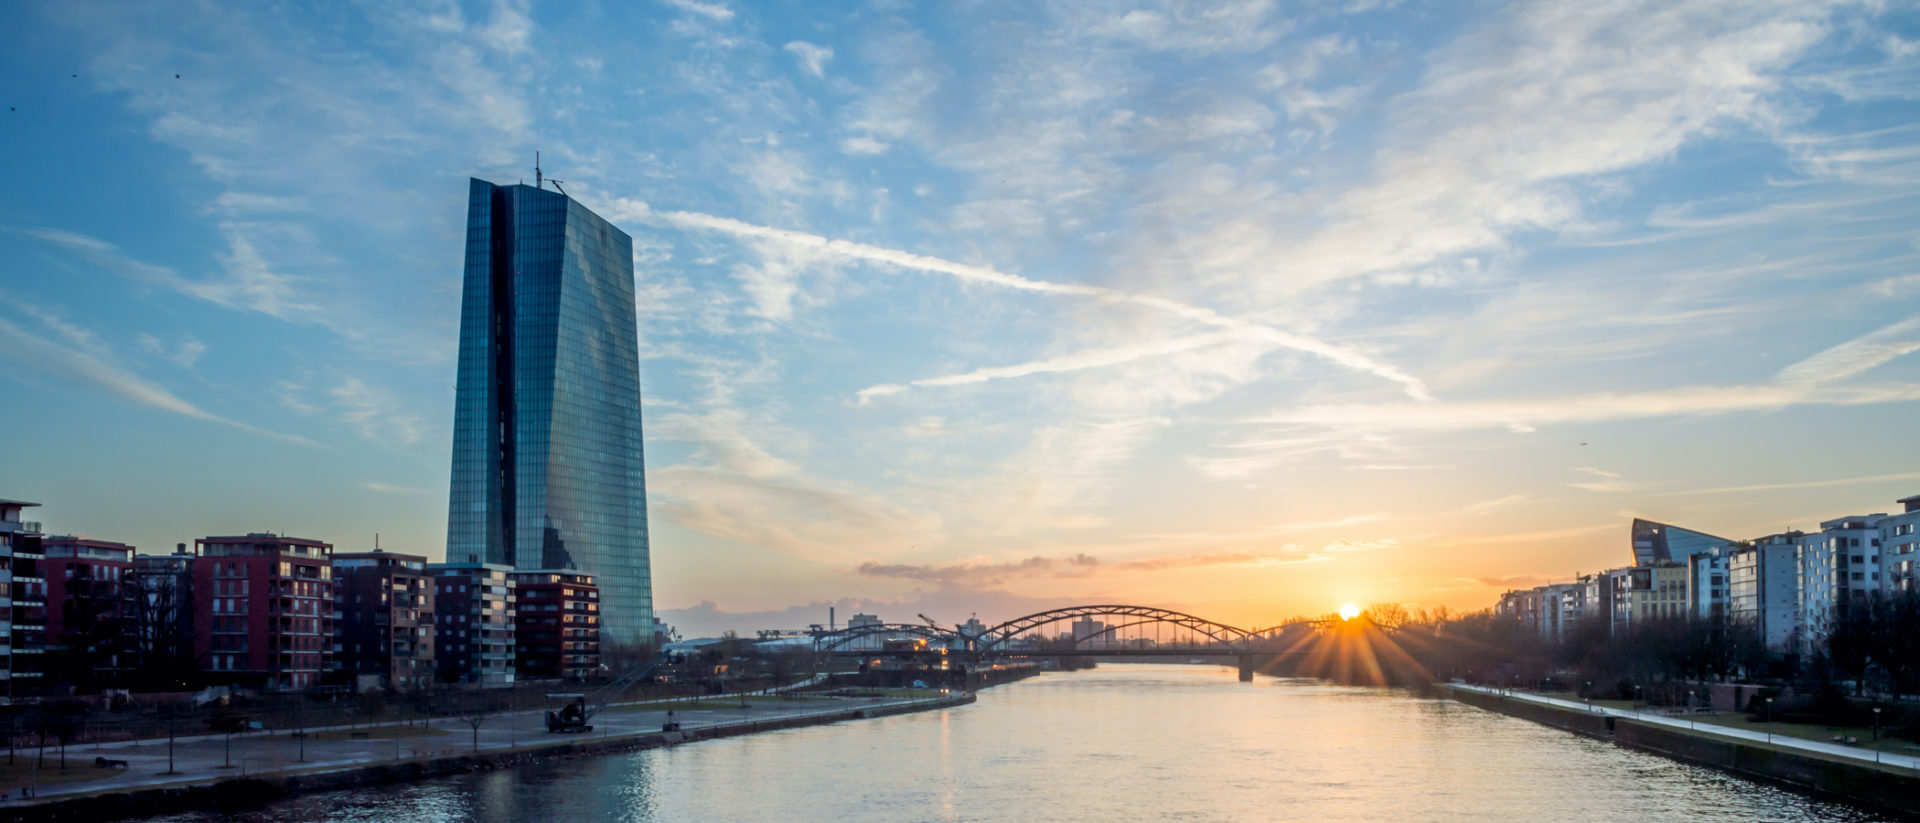 European Central Bank at Frankfurt city riverside sunrise. Business Impact article image for Money talks: Why banks must learn to communicate with ordinary people.